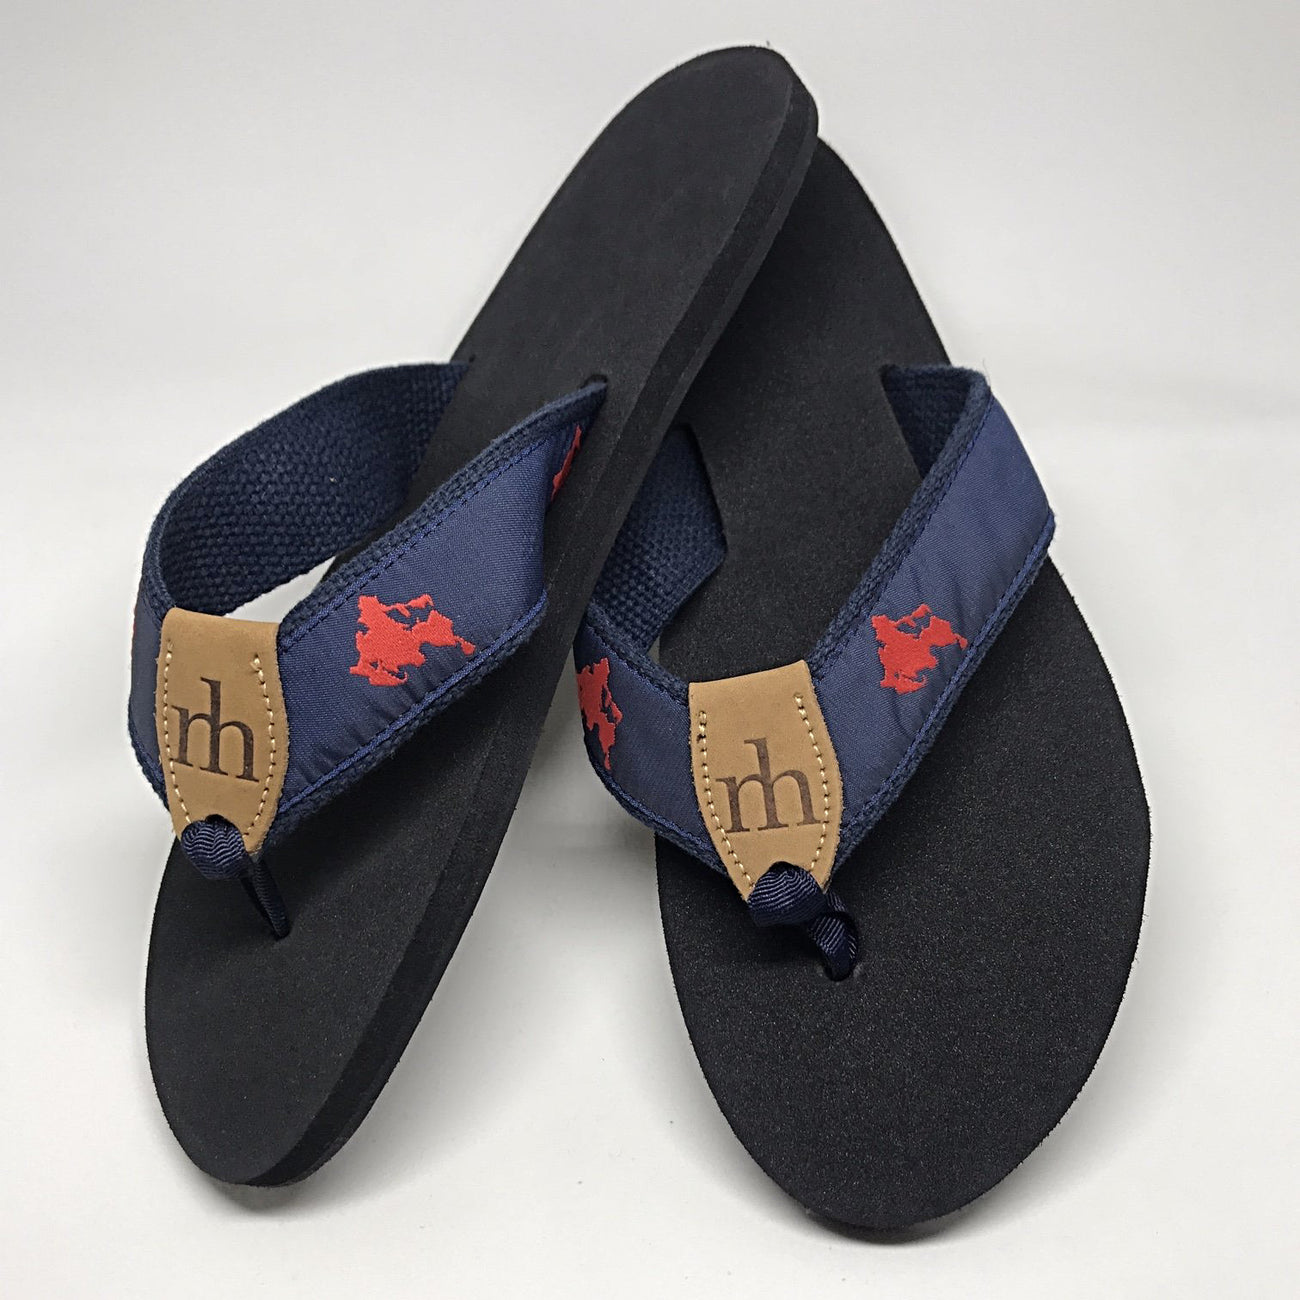 Shelter Island Flip Flops - Navy and Red